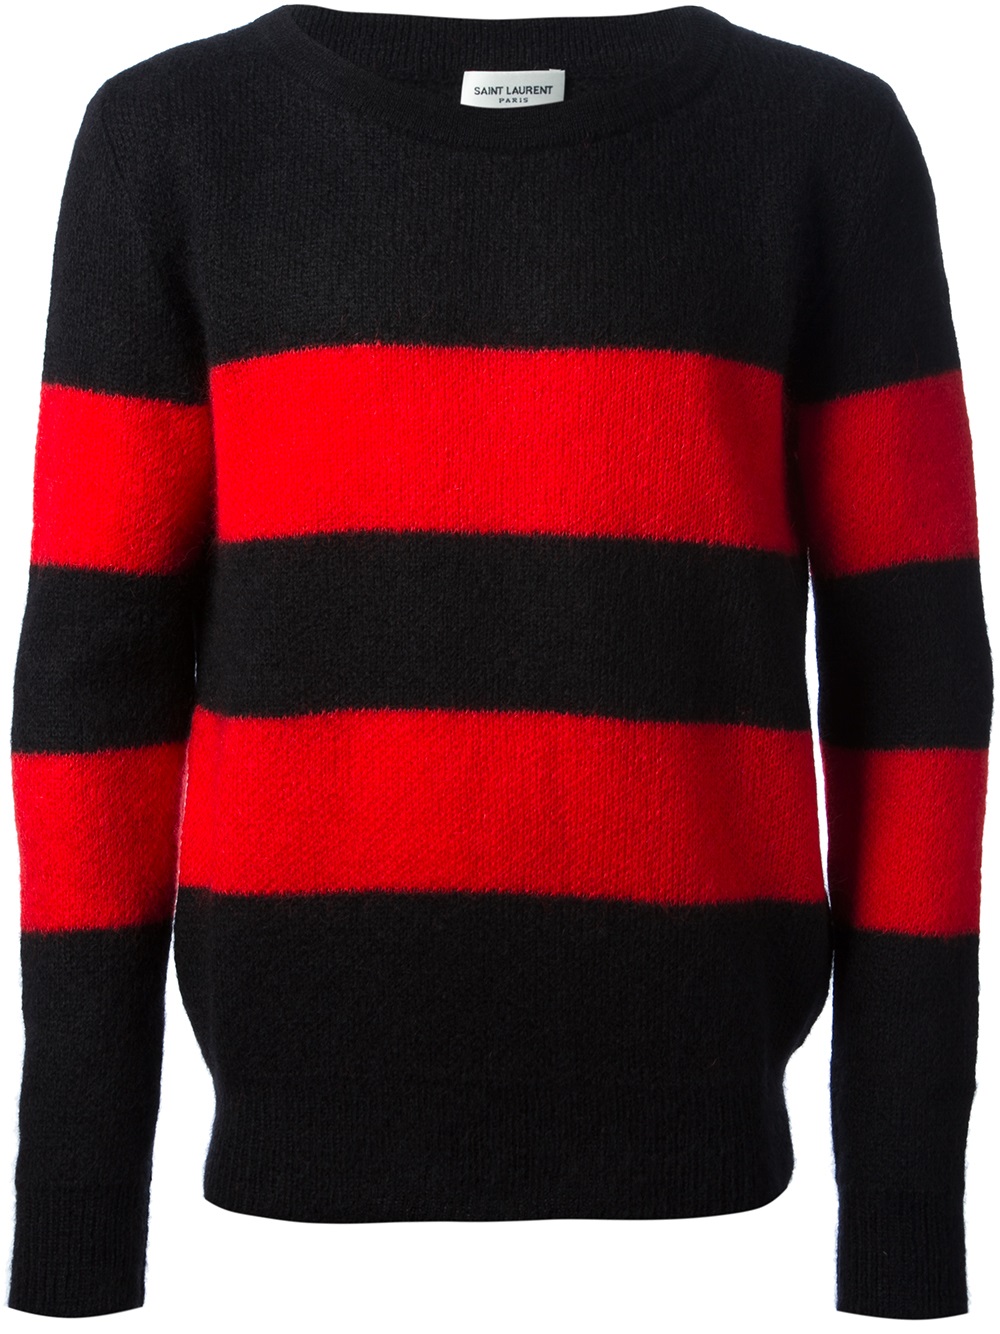 Lyst - Saint Laurent Striped Sweater in Red for Men